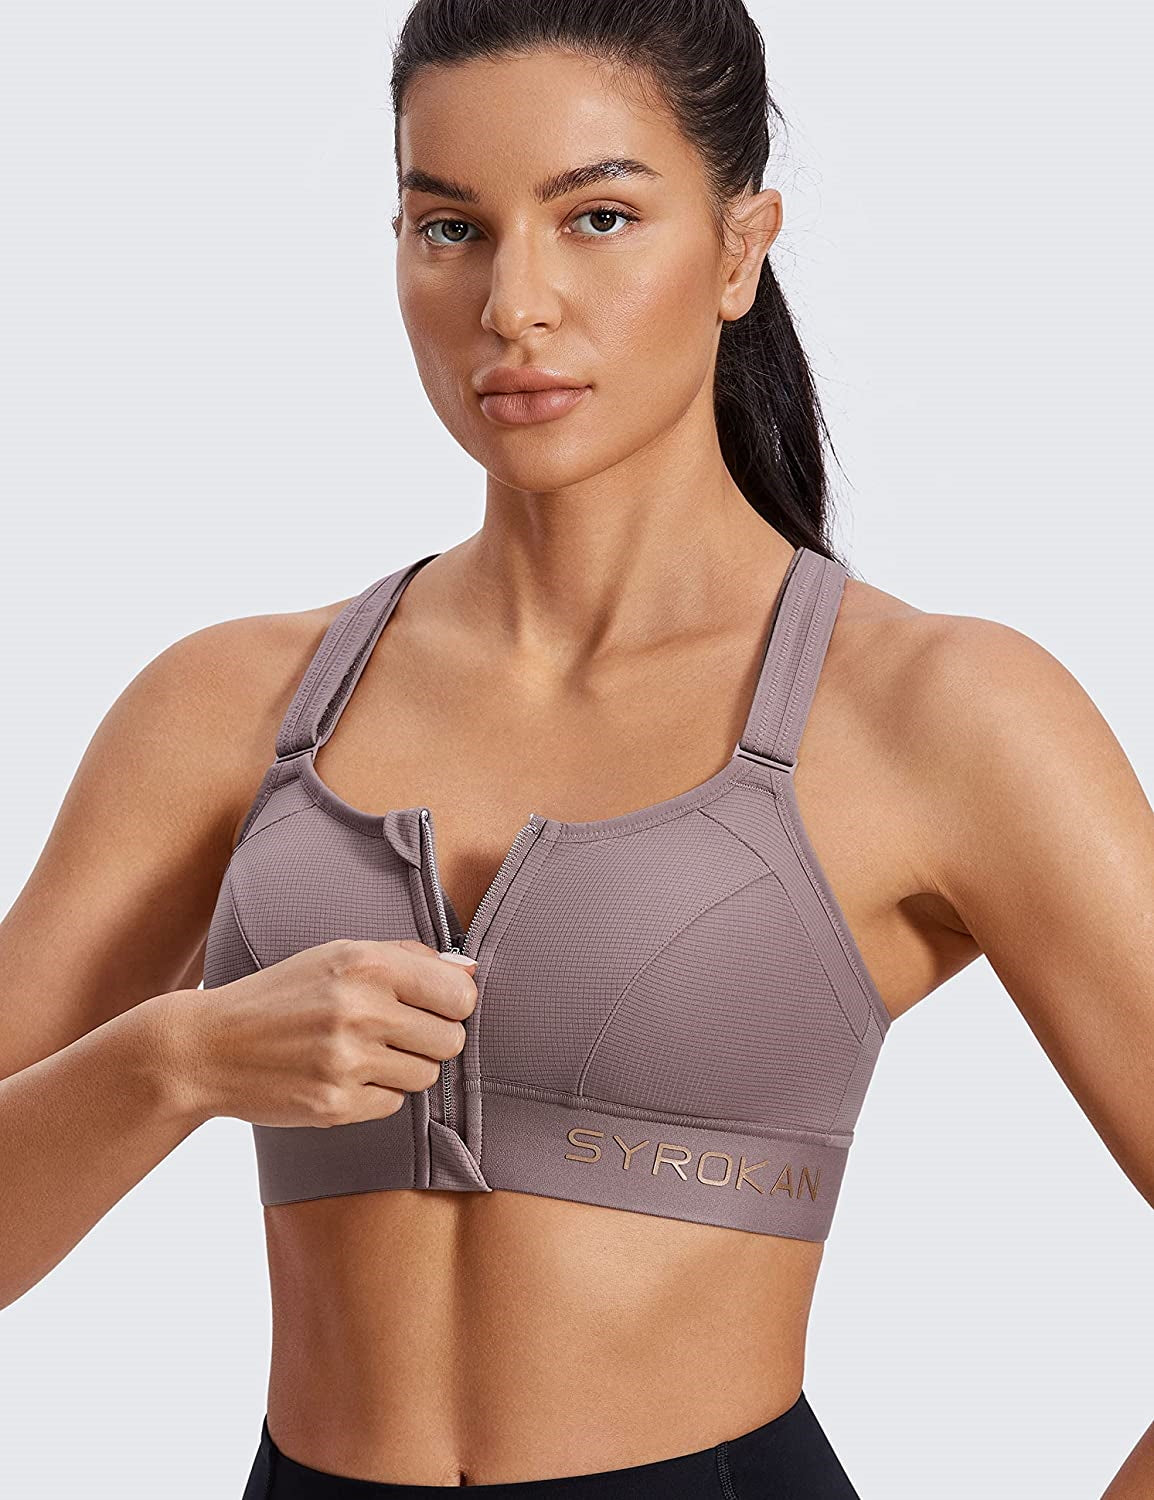 Panache Womens Underwired Sports Bra Grey32 F ** More info could